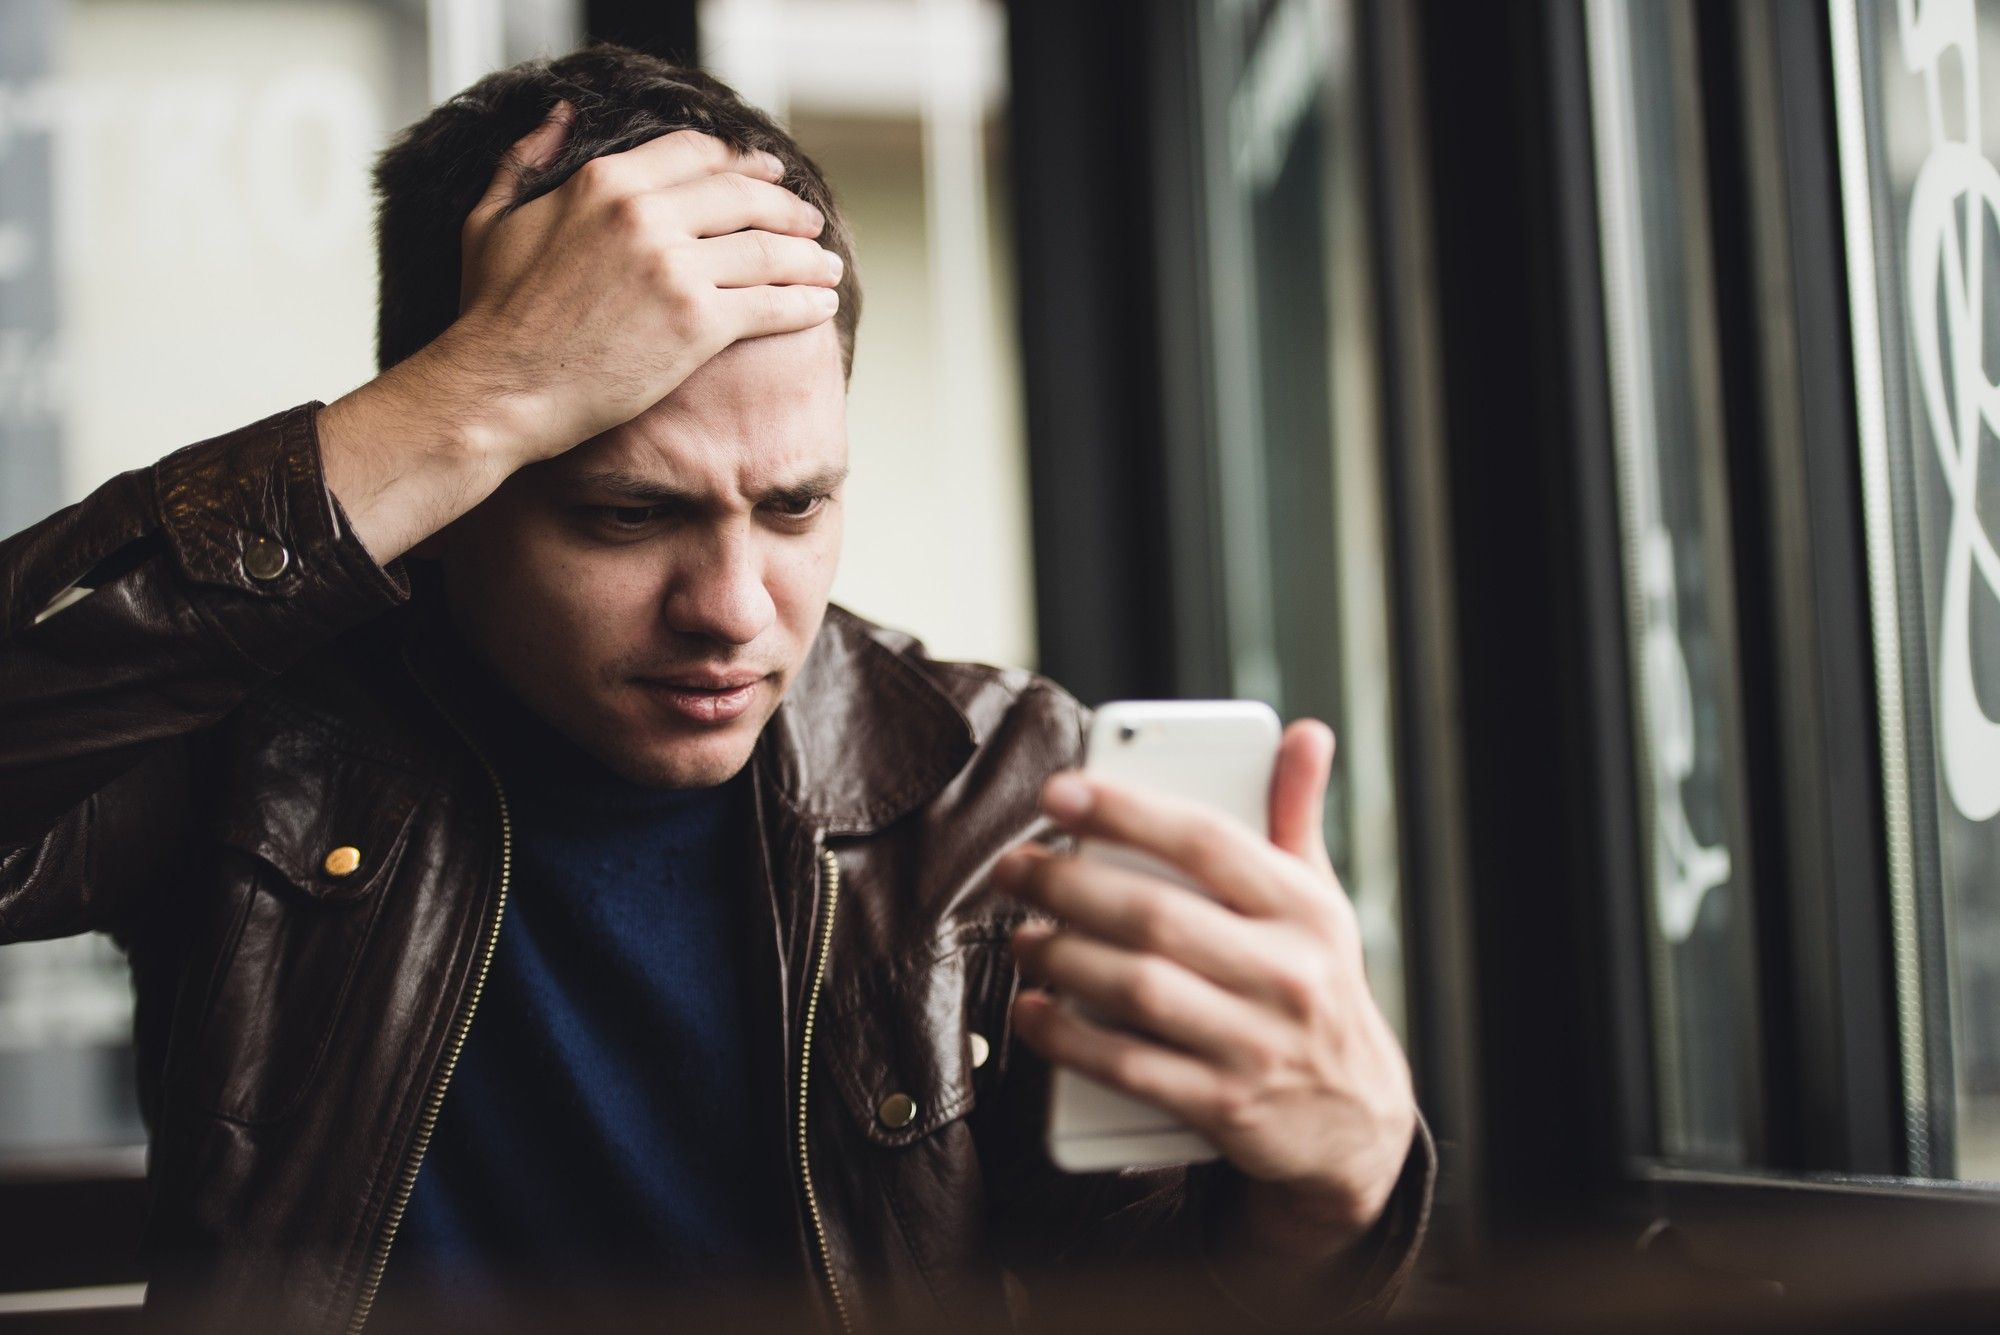 young man looking at phone with shock or annoyance